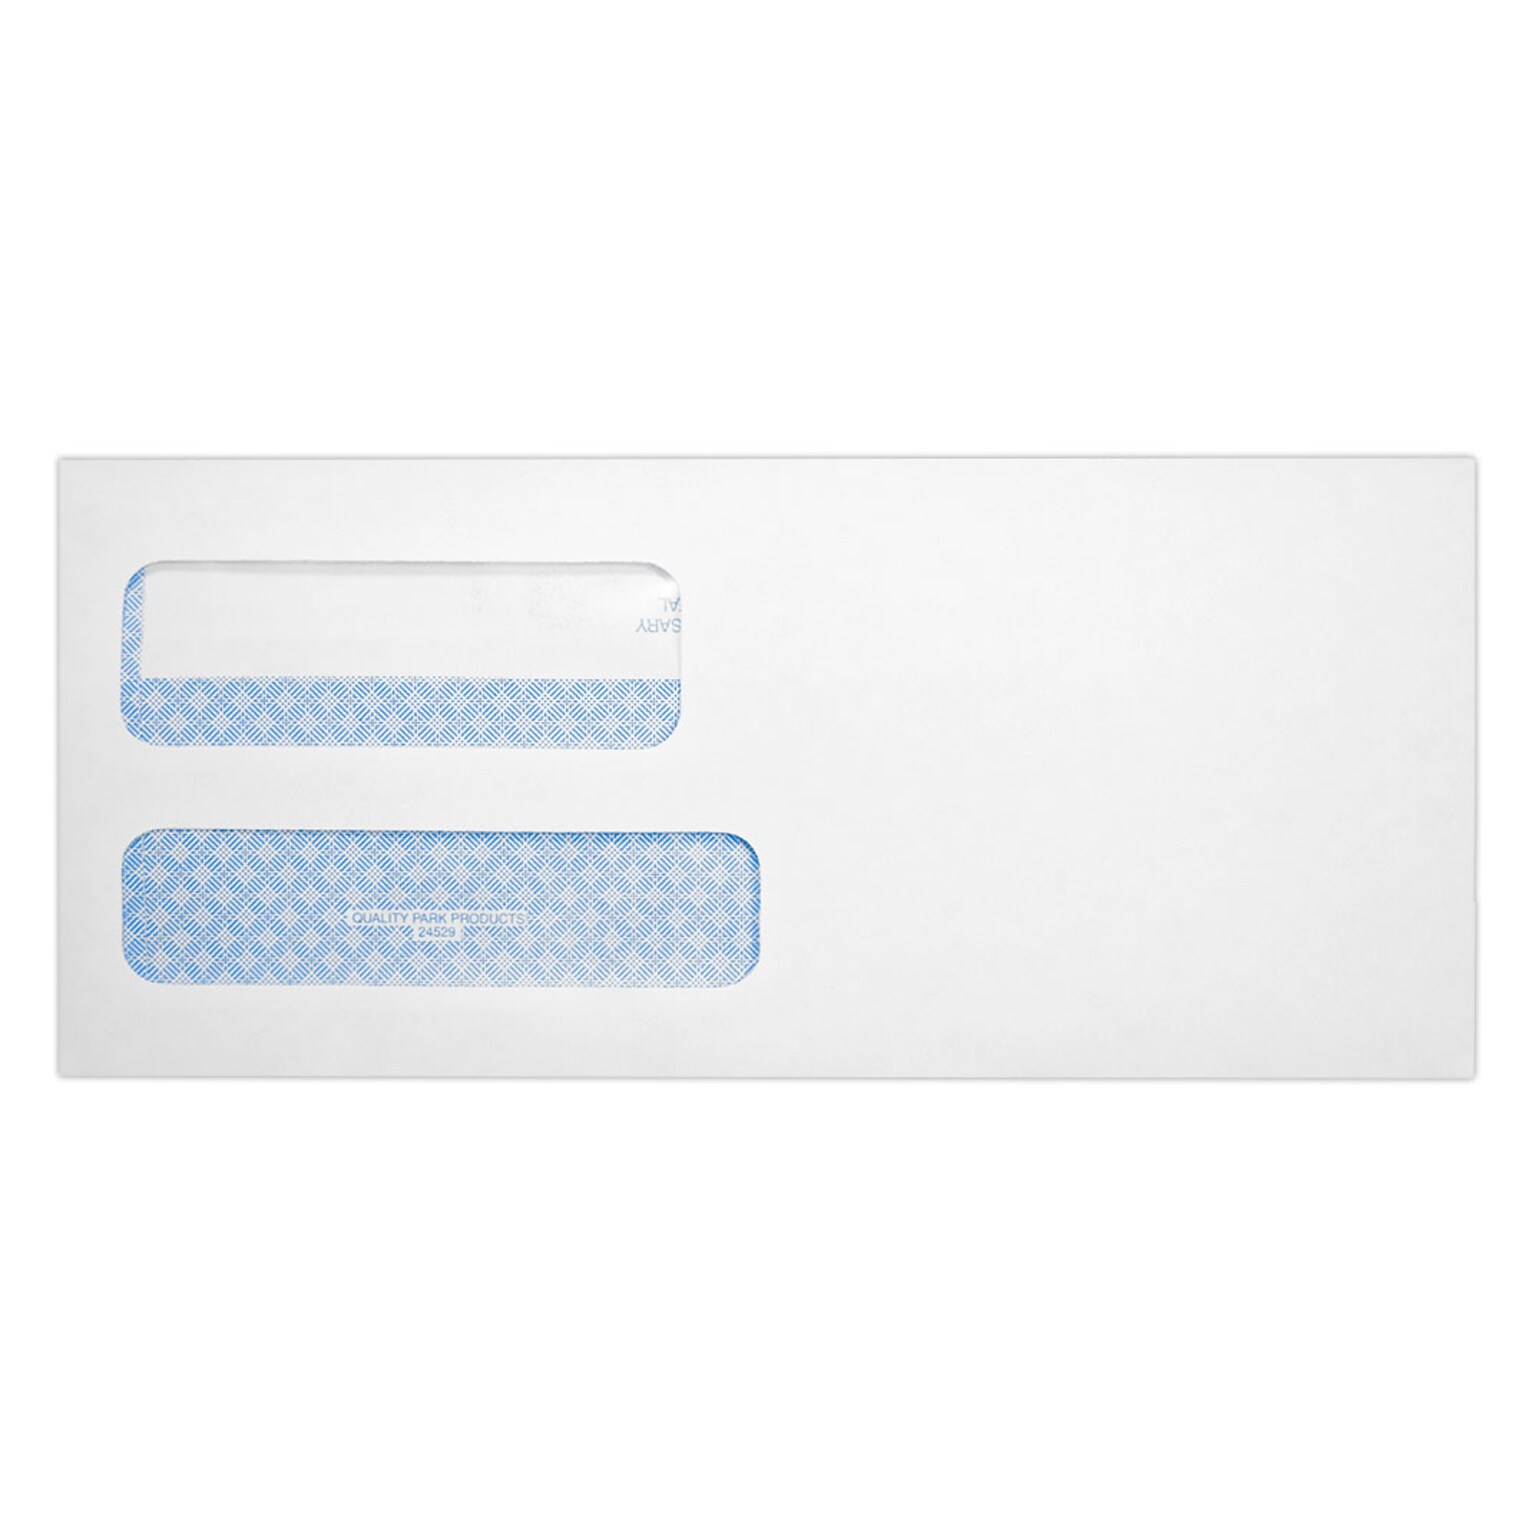 Quality Park Redi-Seal Self Seal #10 Double Window Envelope, 4 1/2 x 9 1/2, White Wove, 250/Pack (24559-QP-250)